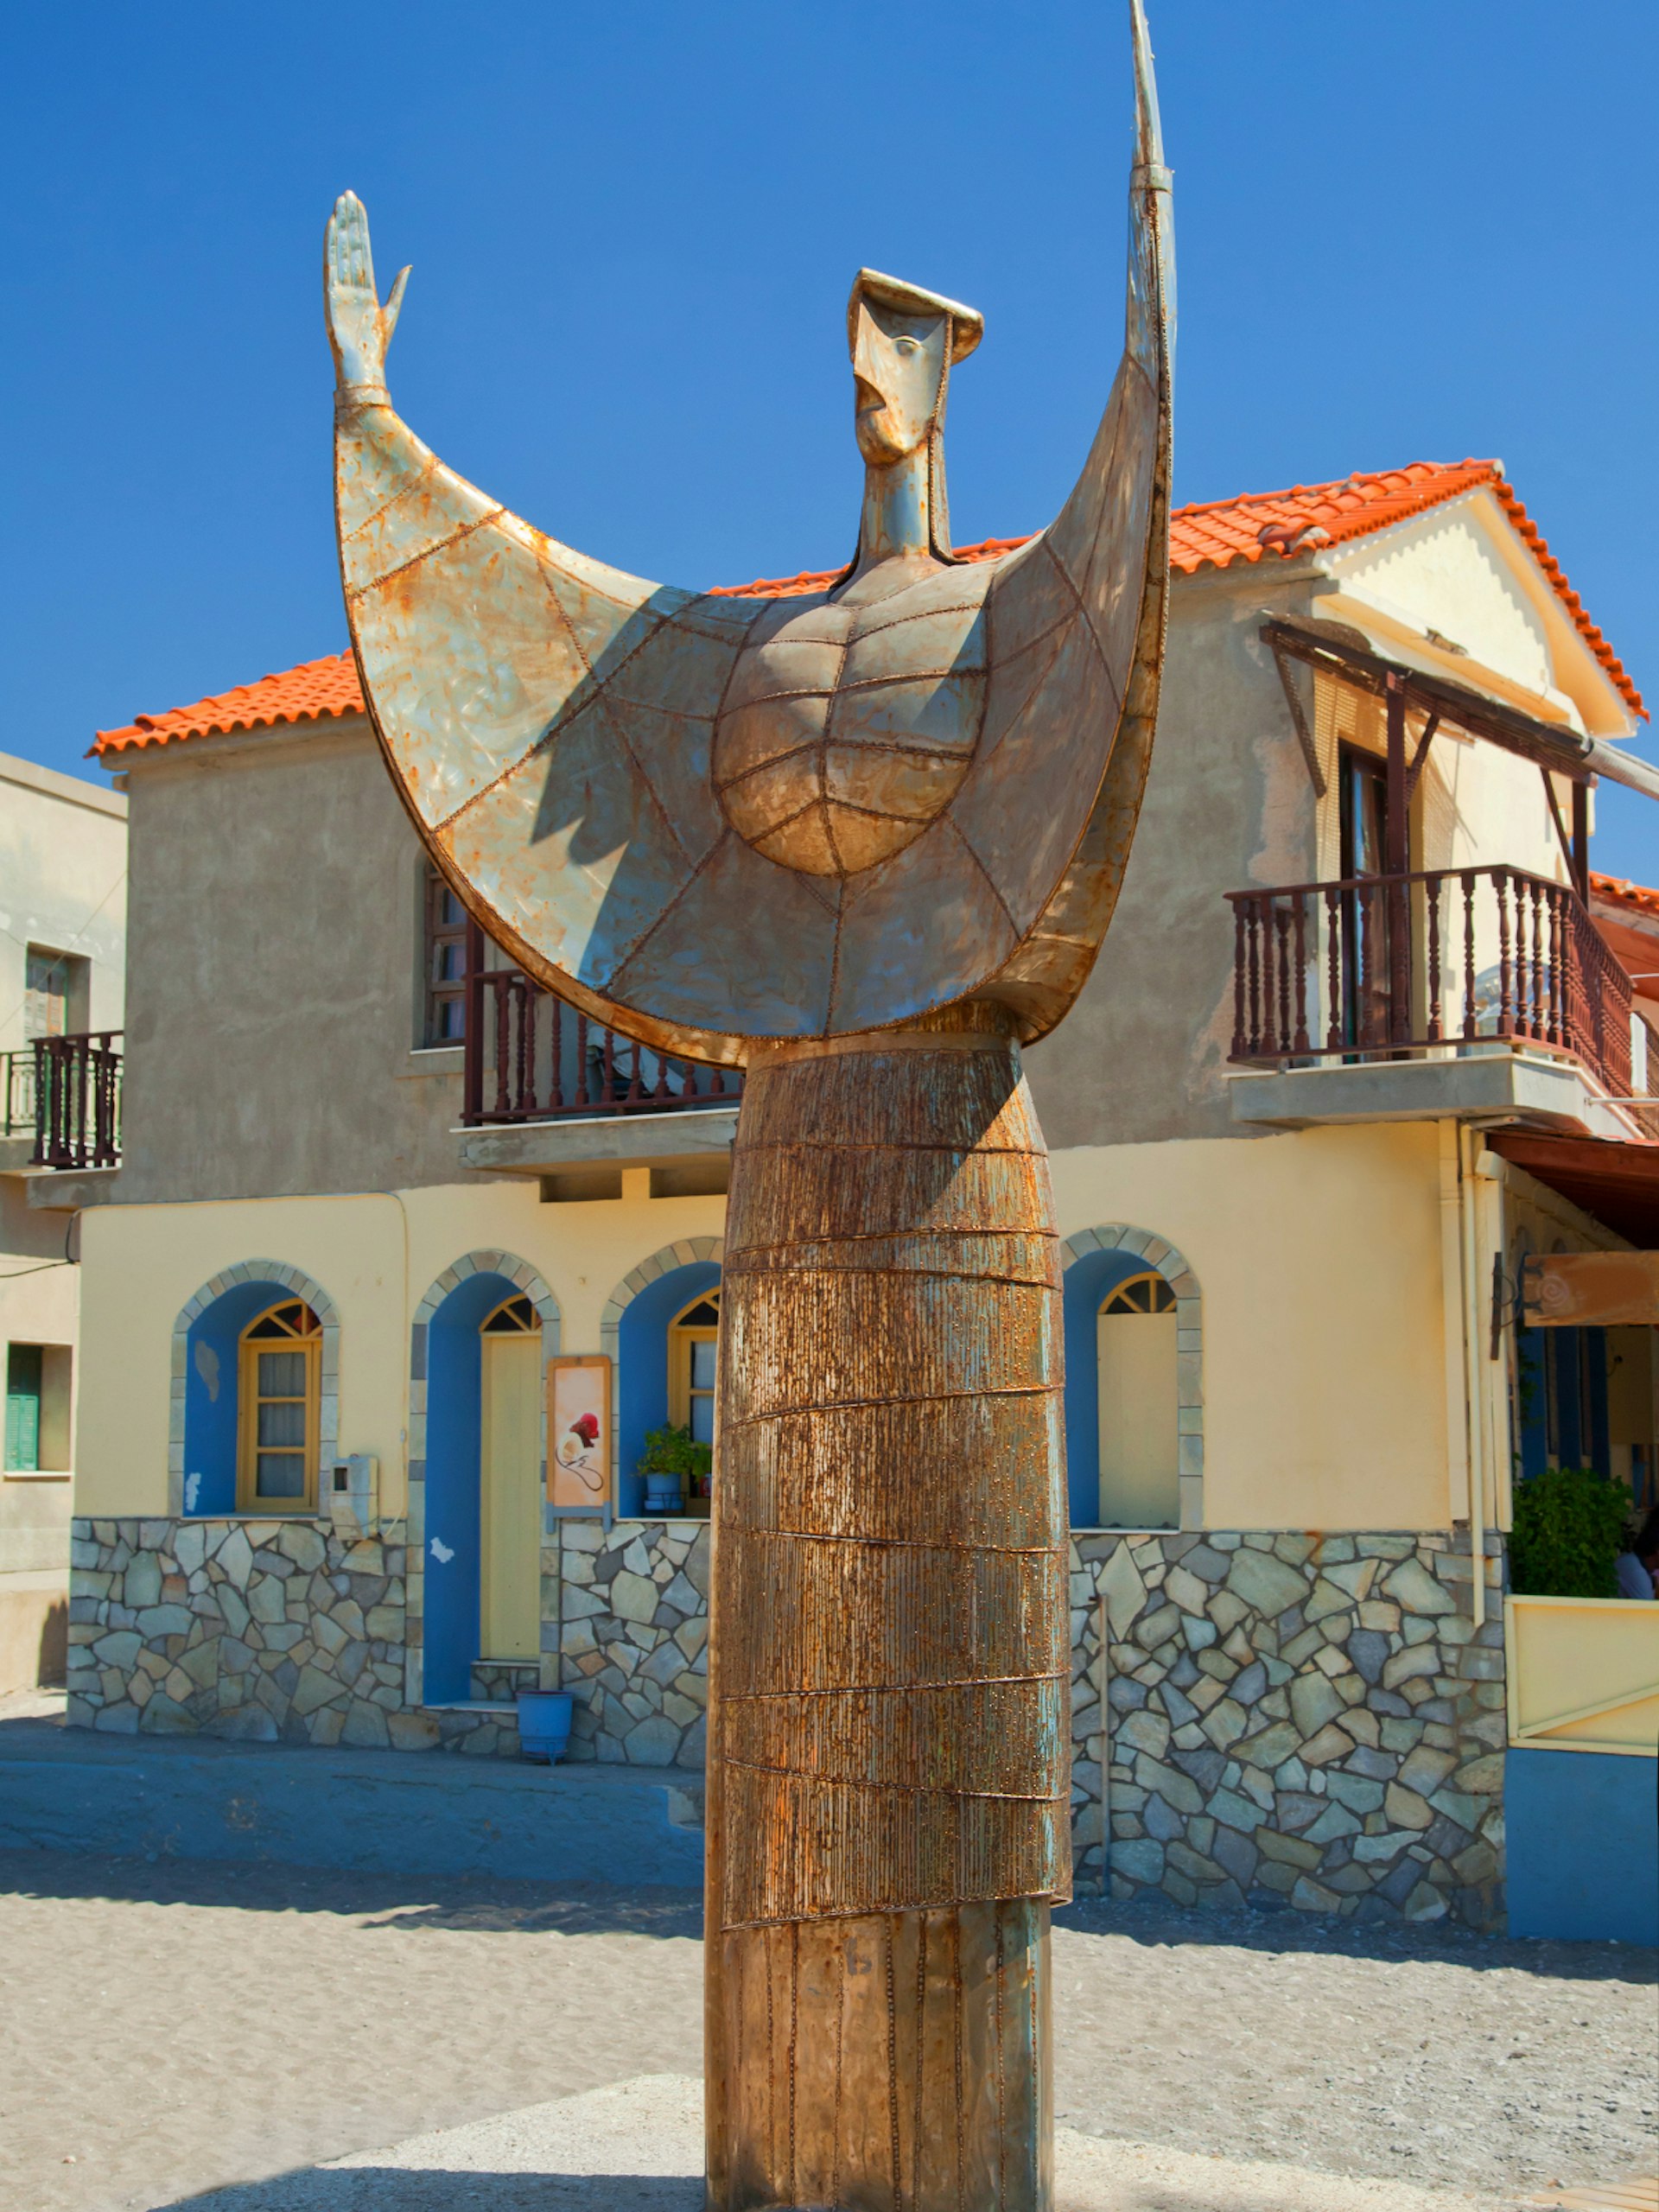 The statue of ancient Greek poet Sappho in her birthplace, Skala Eresou on Lesvos island © iremt / Shutterstock